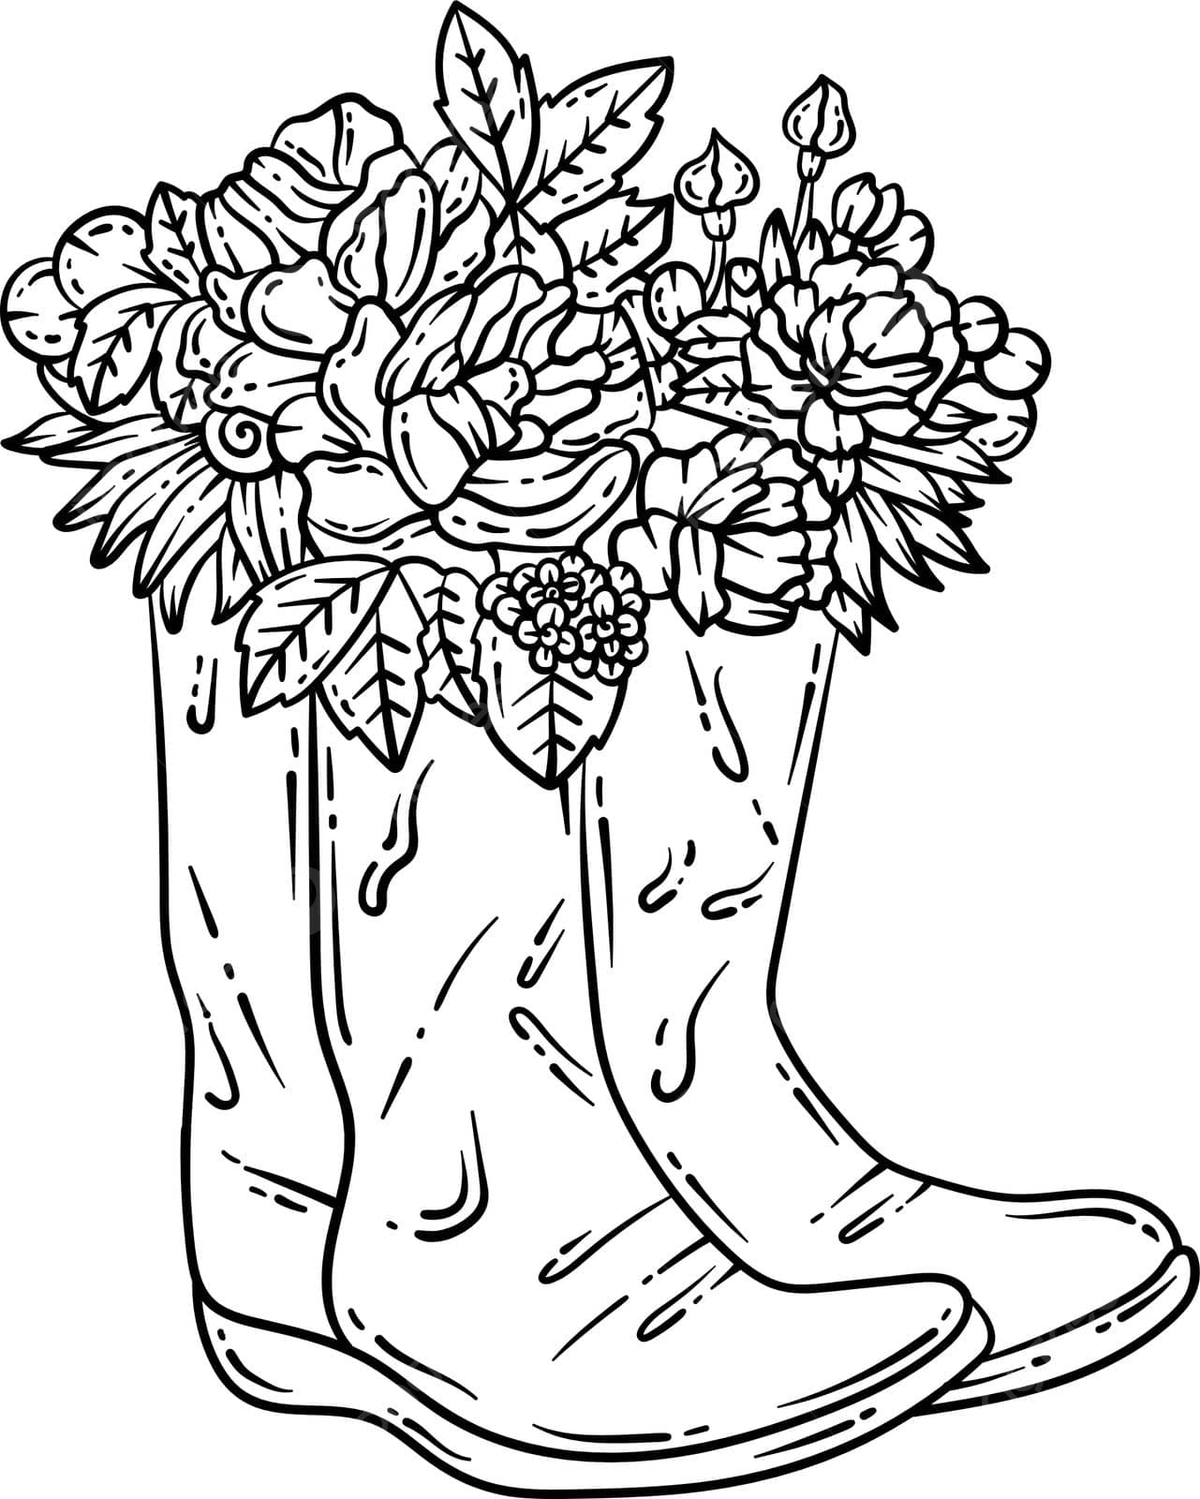 Rubber boots flower spring adult coloring page colouring book spring vector vector colouring book spring vector png and vector with transparent background for free download